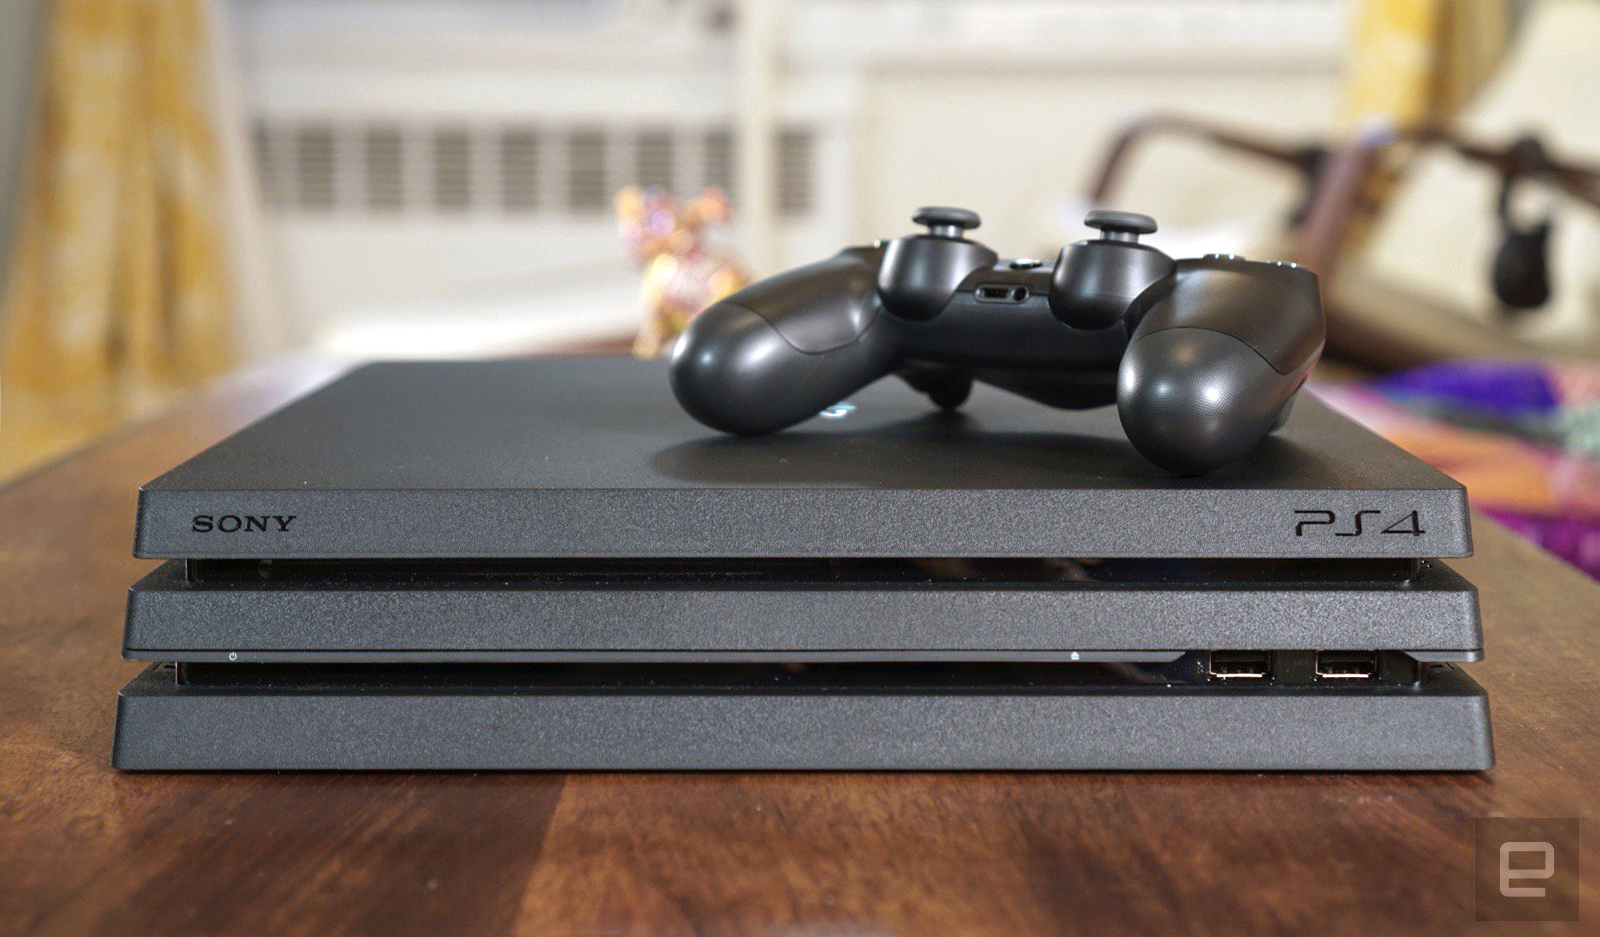 New Features of Sony's Playstation 4 Pro (Review) - GAFollowers